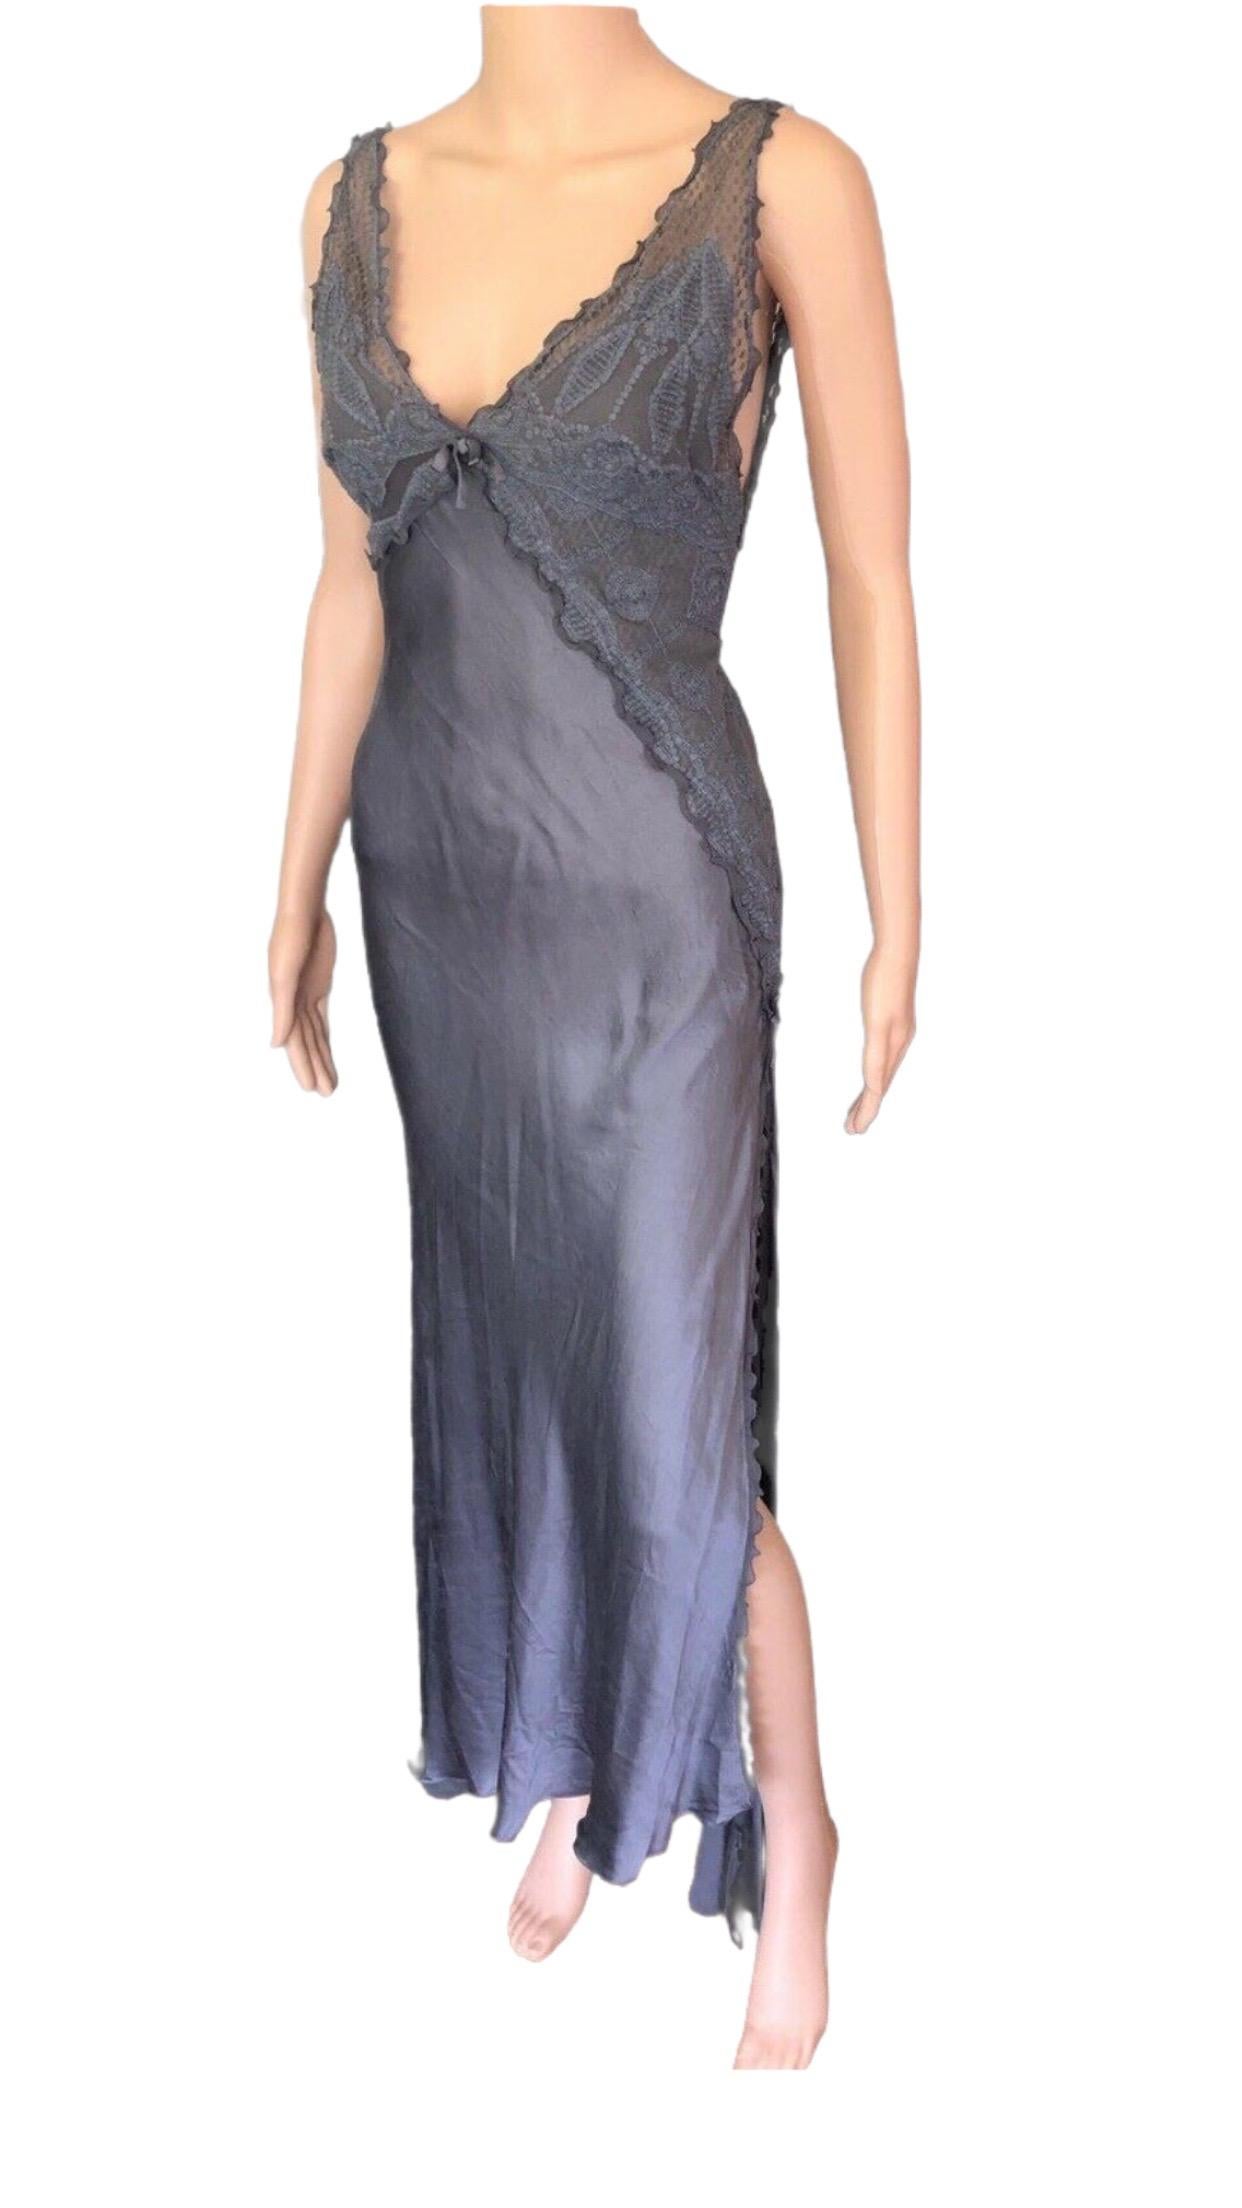 GIANNI VERSACE S/S 1997 Runway Vintage Satin Lace Embroidered Gown  For Sale 5